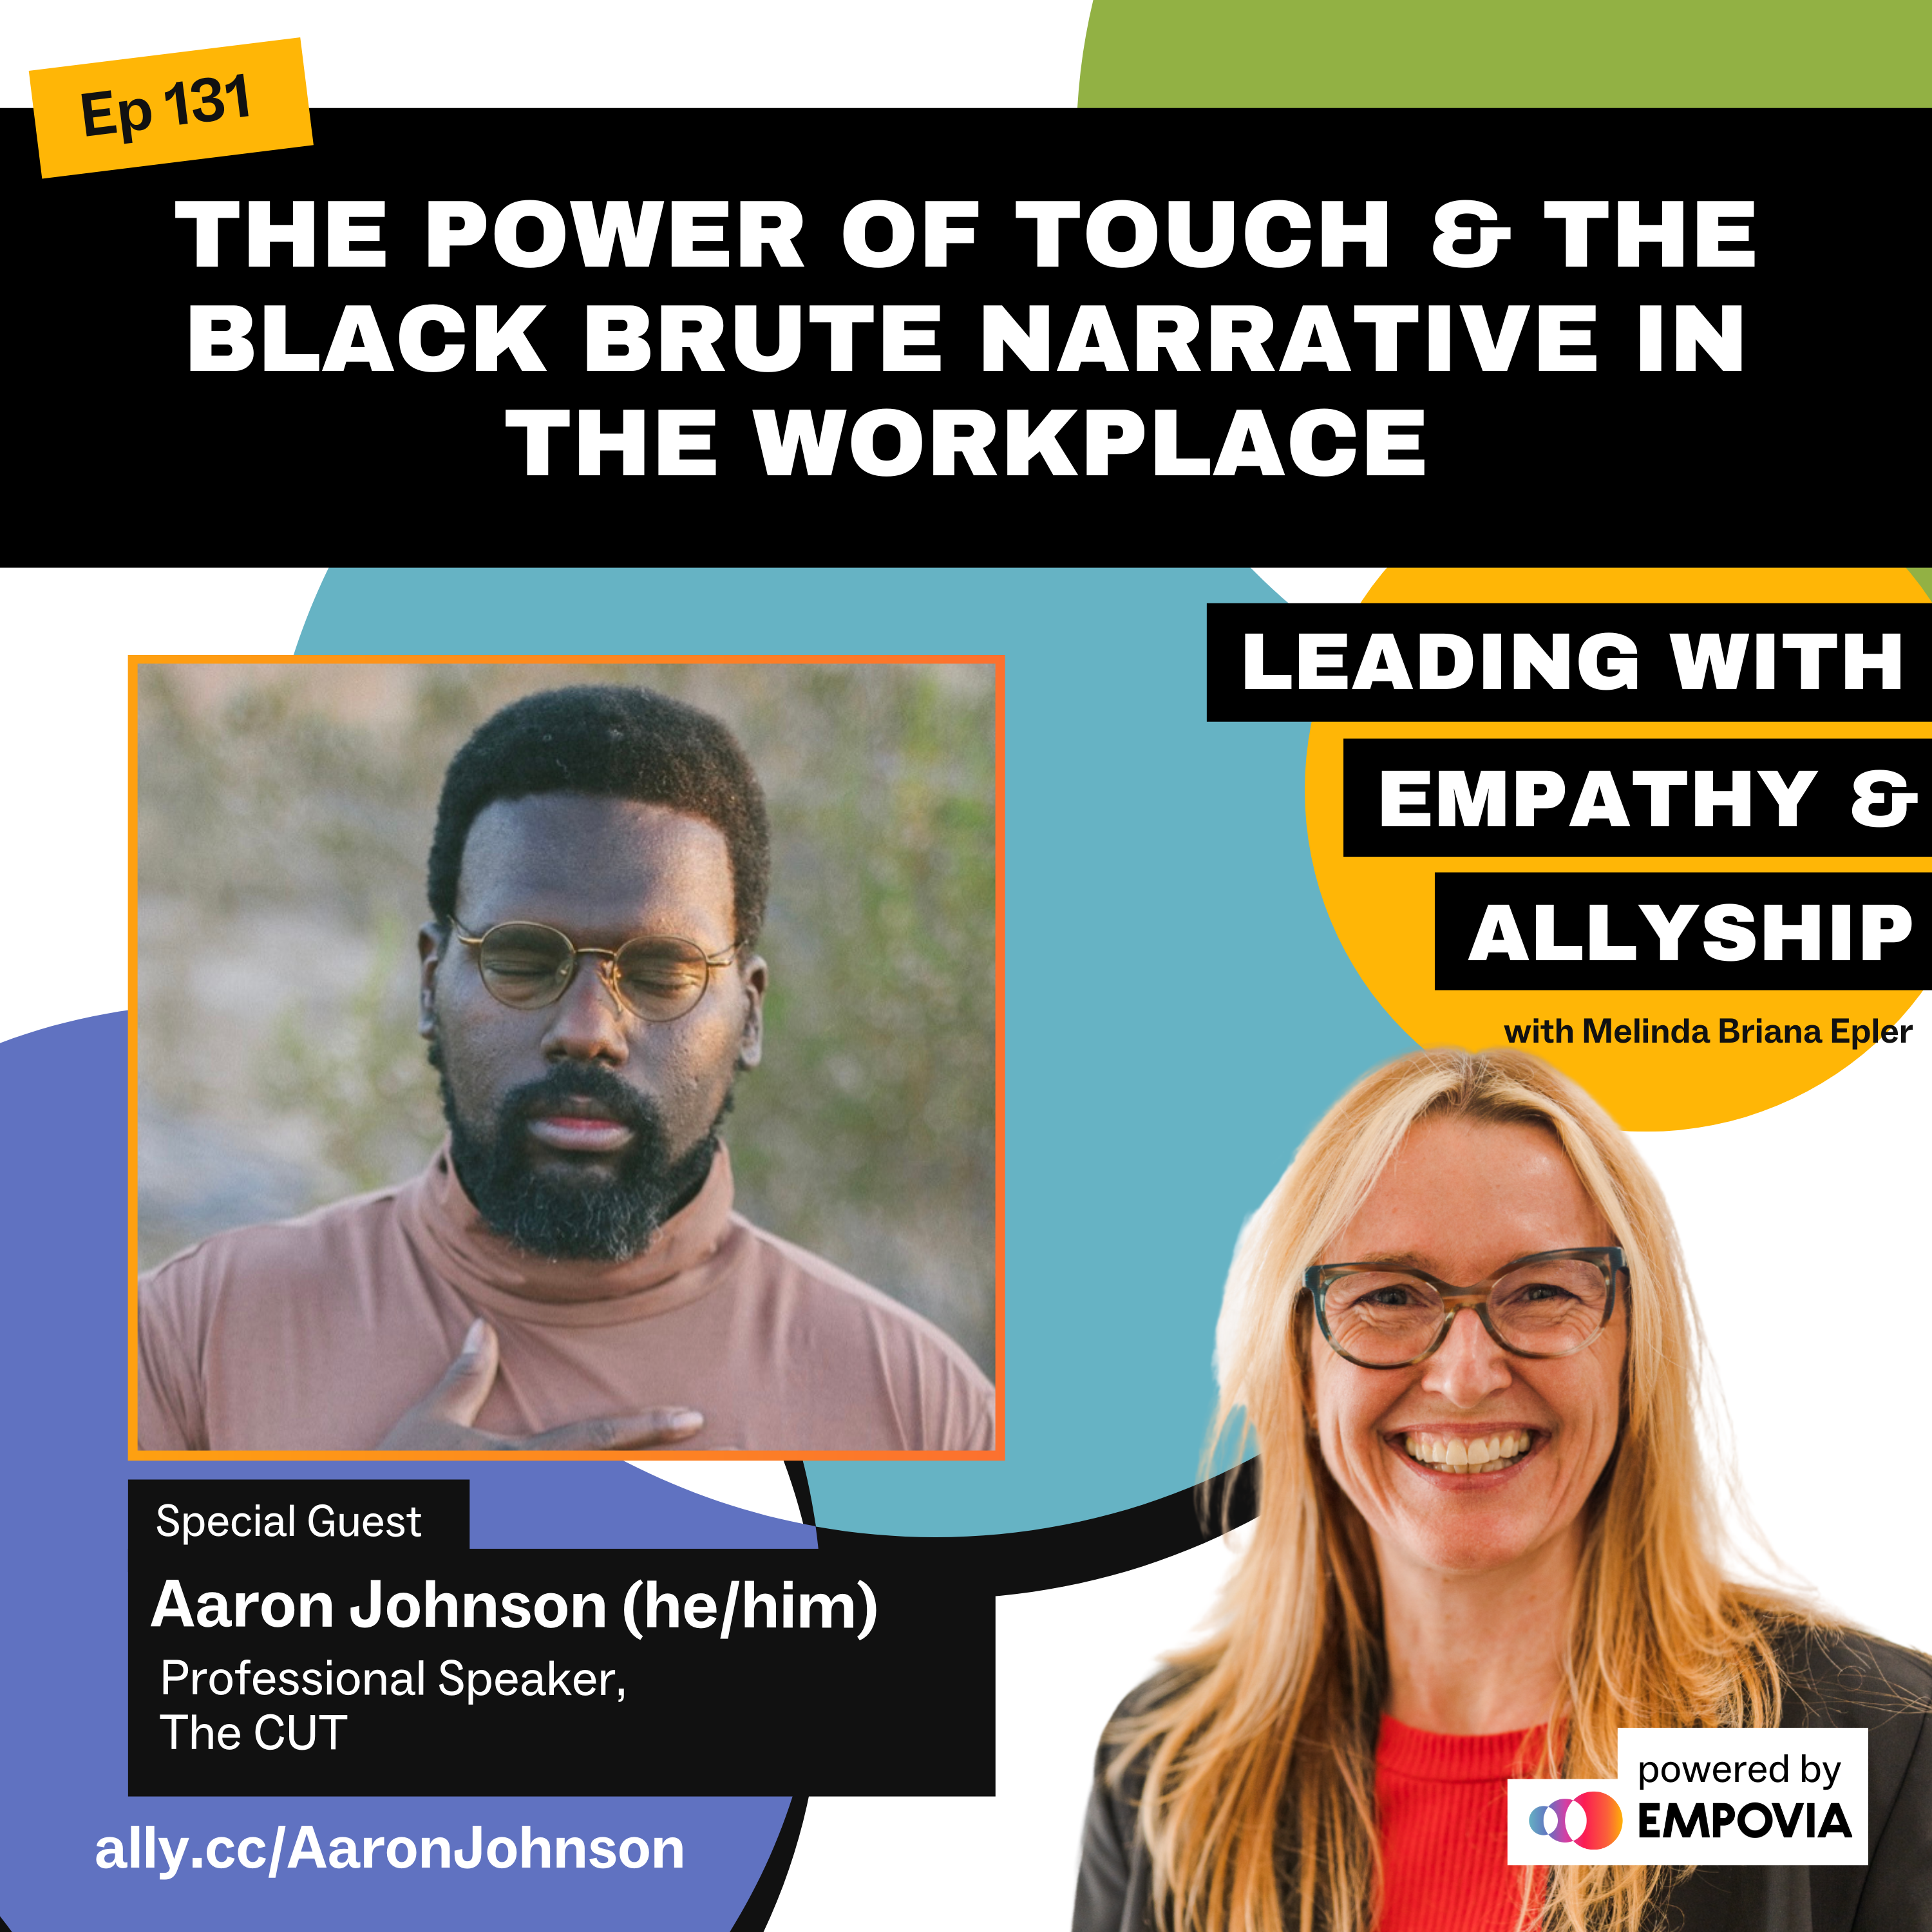 Leading With Empathy & Allyship promo and photos of Aaron Johnson, an African Heritage man with short black afro hair, black goatee and beard, tan turtleneck, and glasses, and host Melinda Briana Epler, a White woman with blonde and red hair, glasses, red shirt, and black jacket.